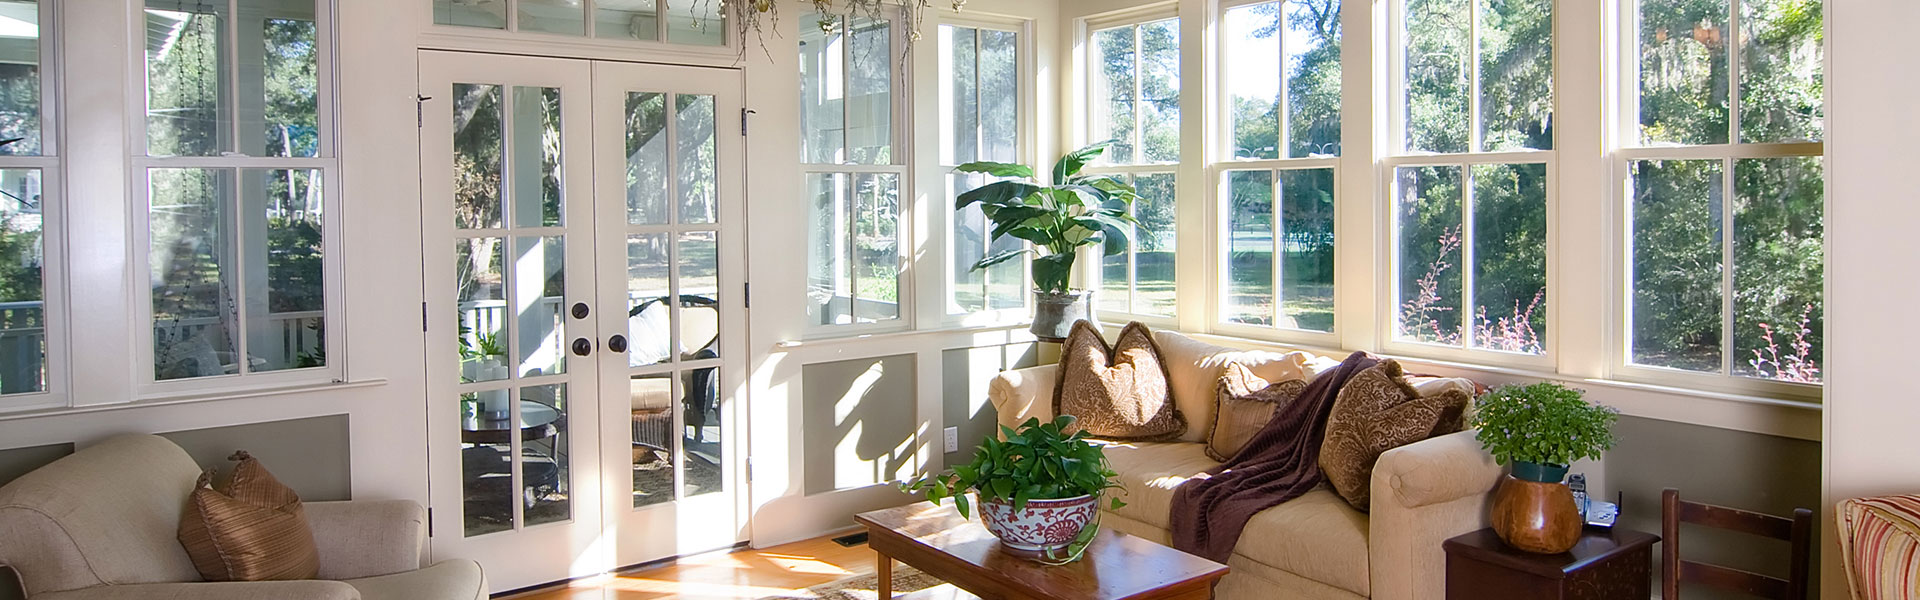 a series of hung windows in a sunroom with patio doors